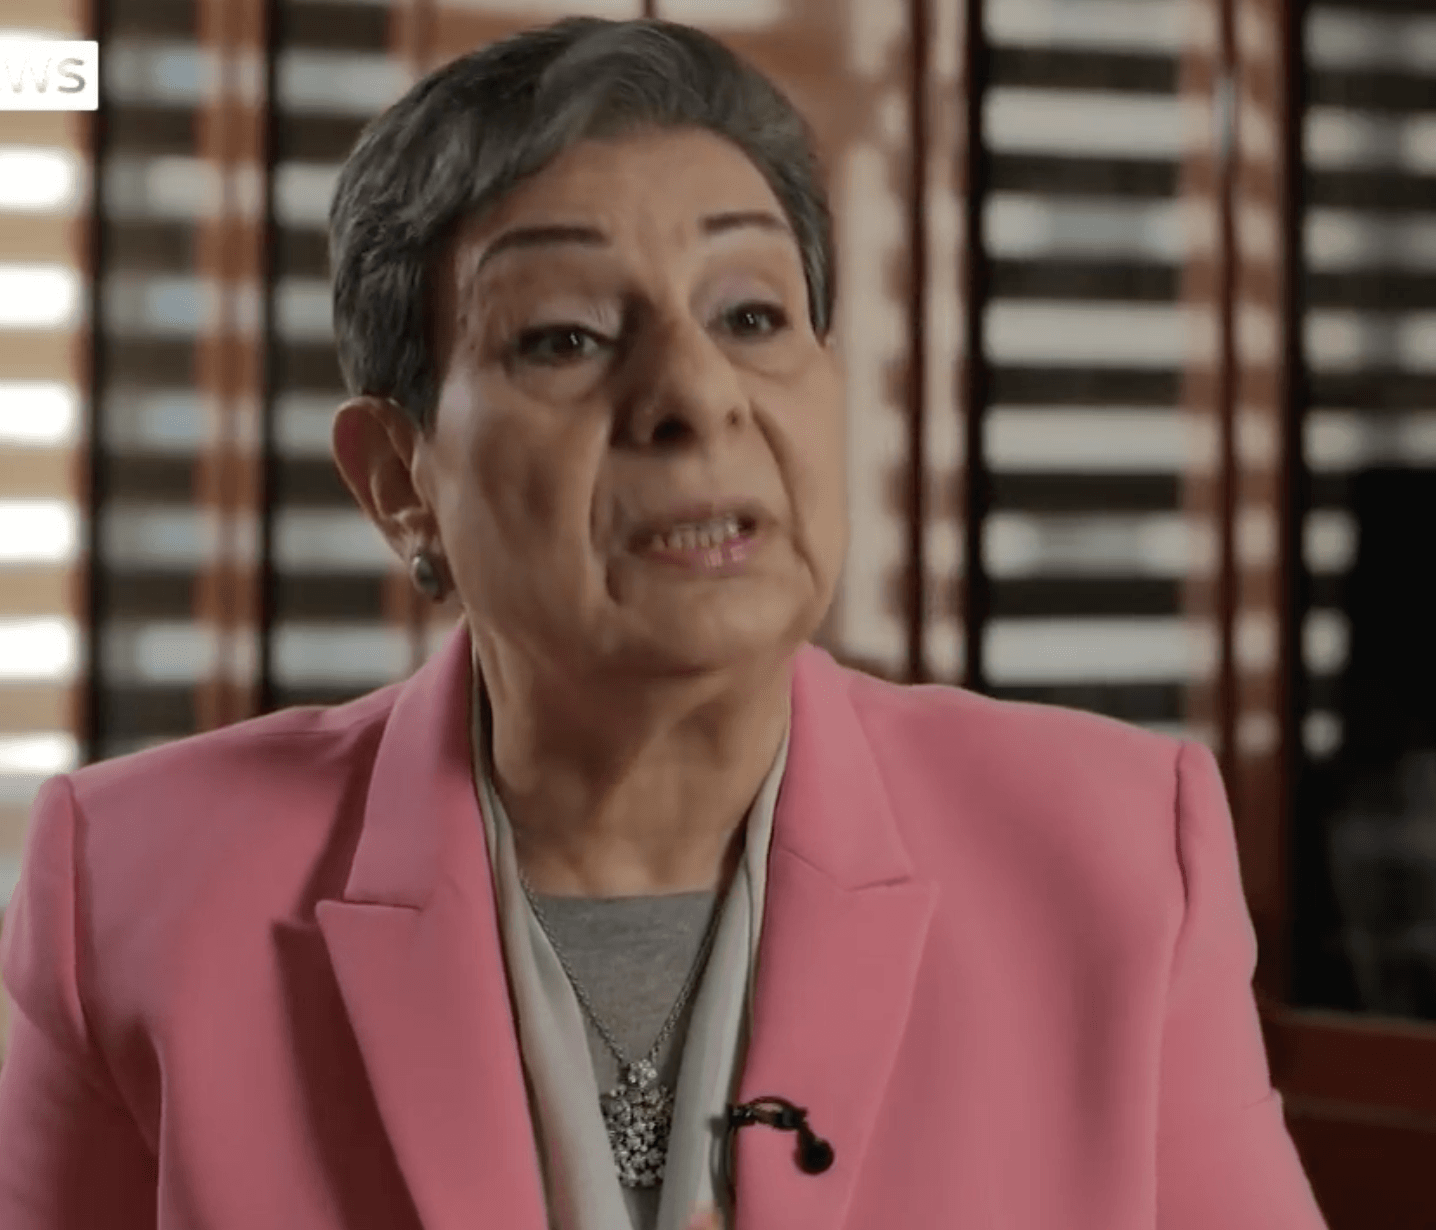 WARNING: Hanan Ashrawi is a passionate advocate of Palestinian rights